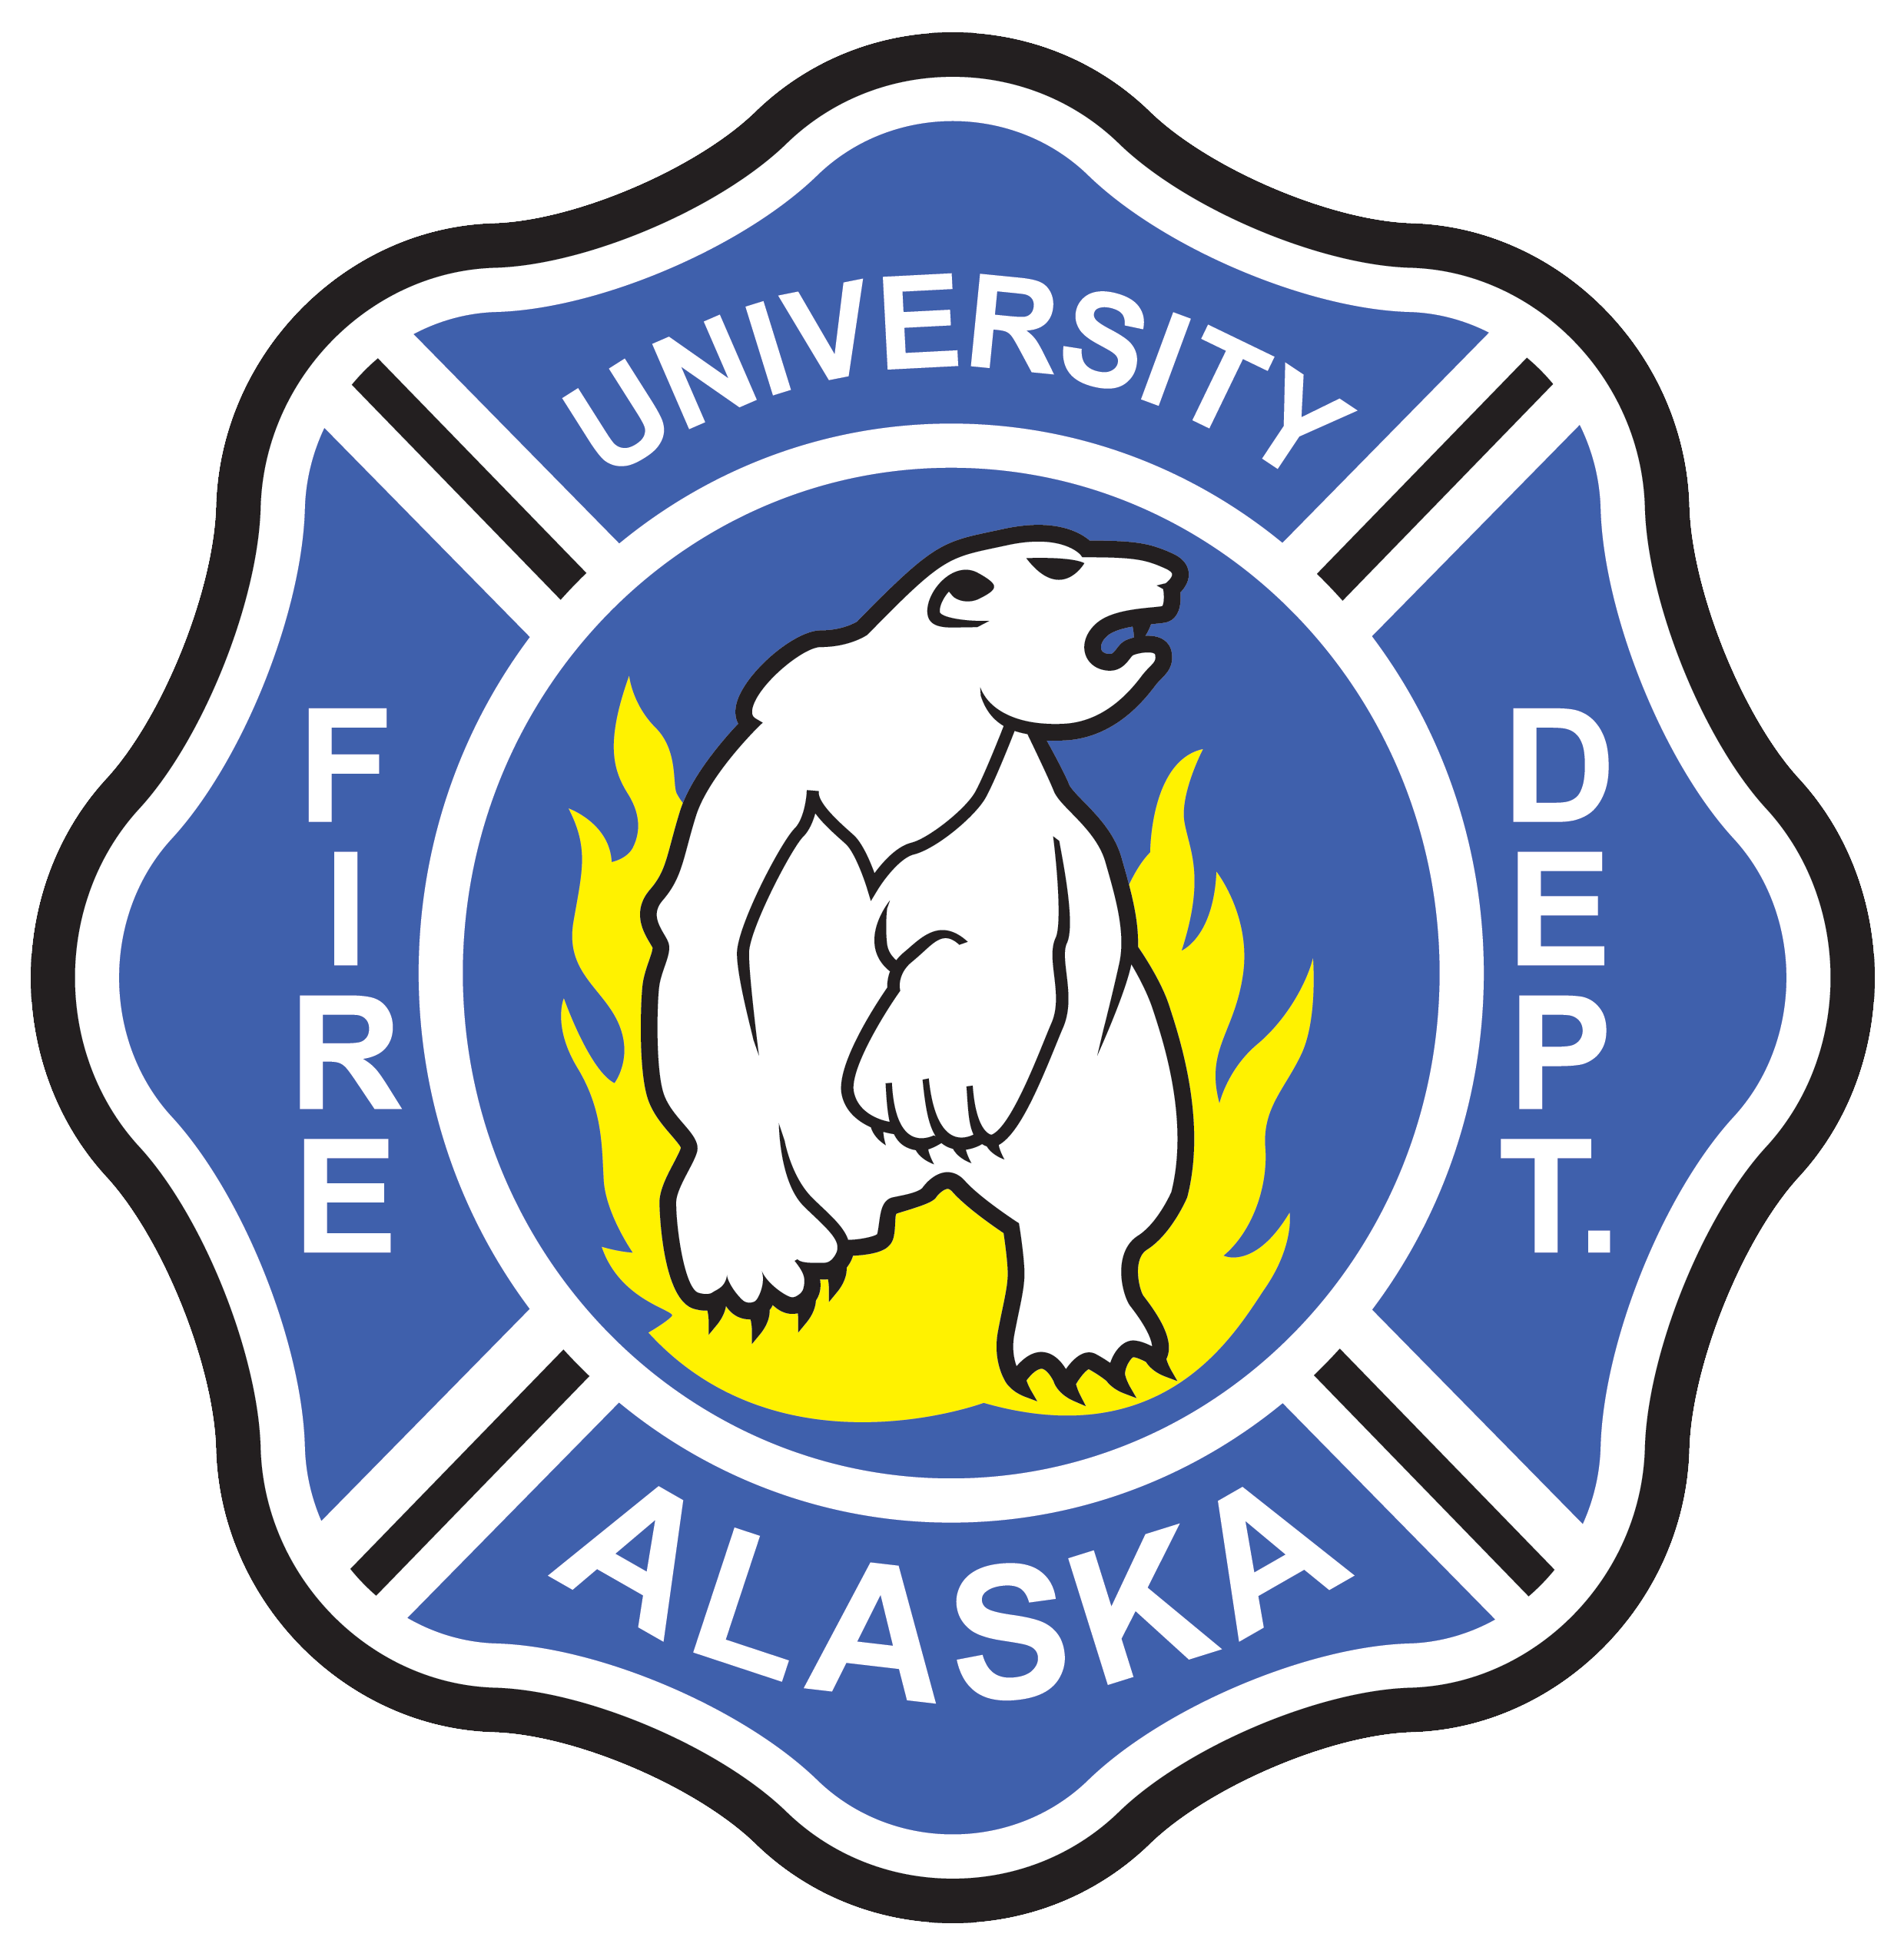 Firemen Logo - How To Become A Student or Scholarship Firefighter. University Fire